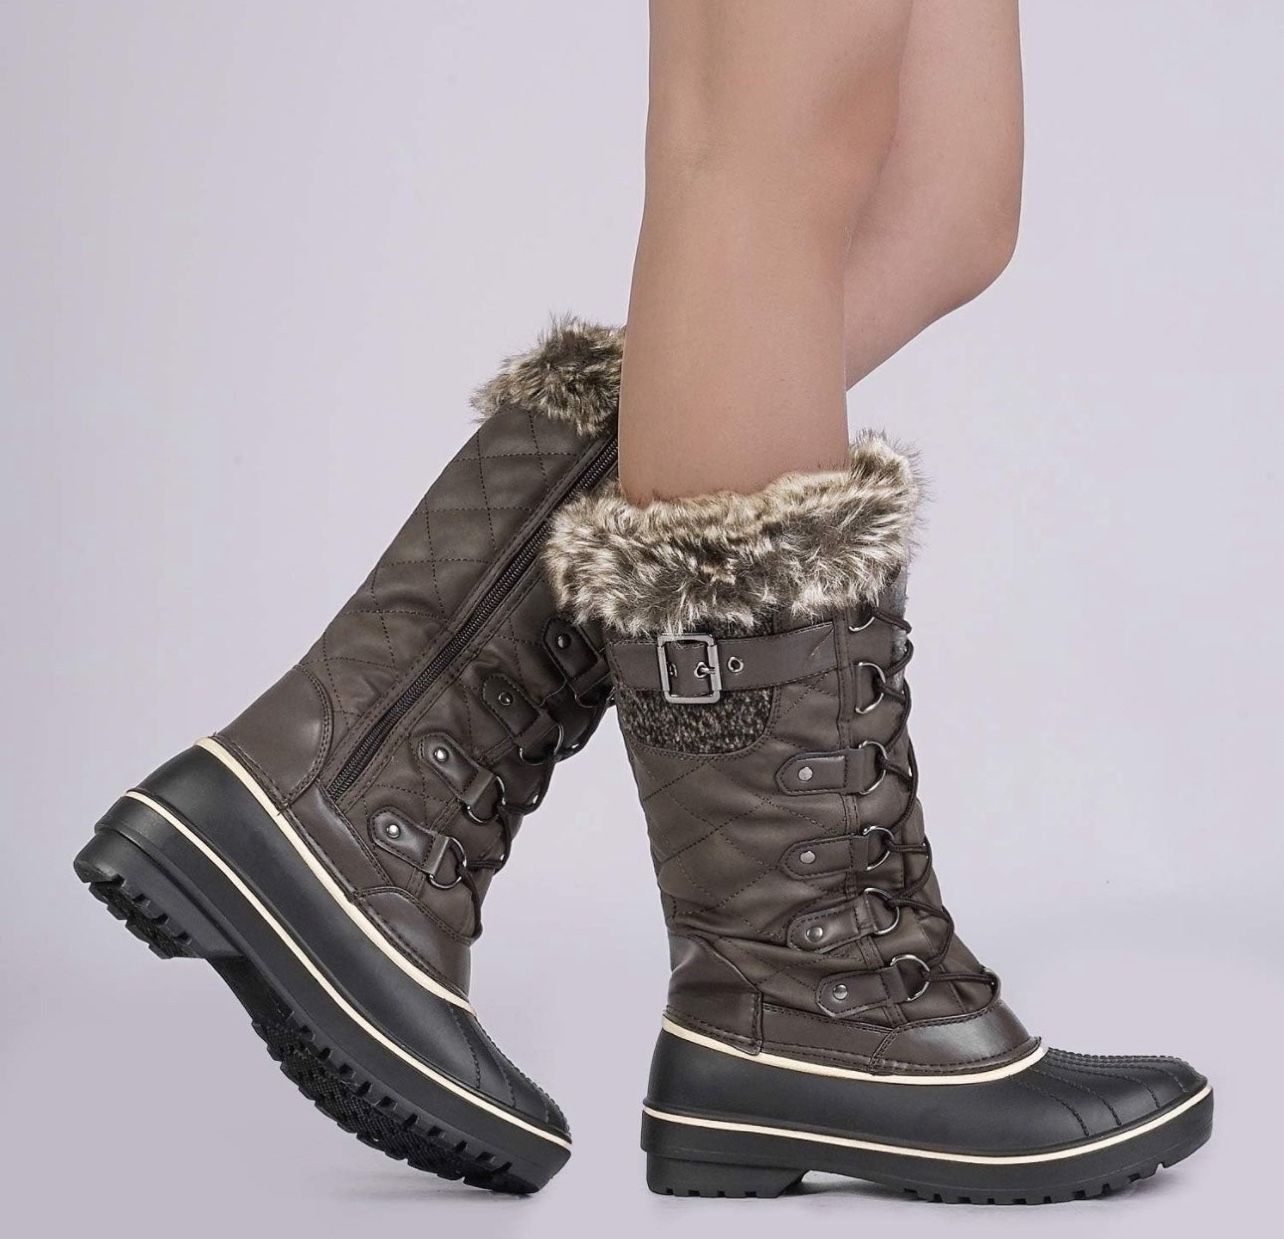 DREAM PAIRS Women's DP Warm Faux Fur Lined Mid Calf Winter Snow Boots! New in box! Size 6!